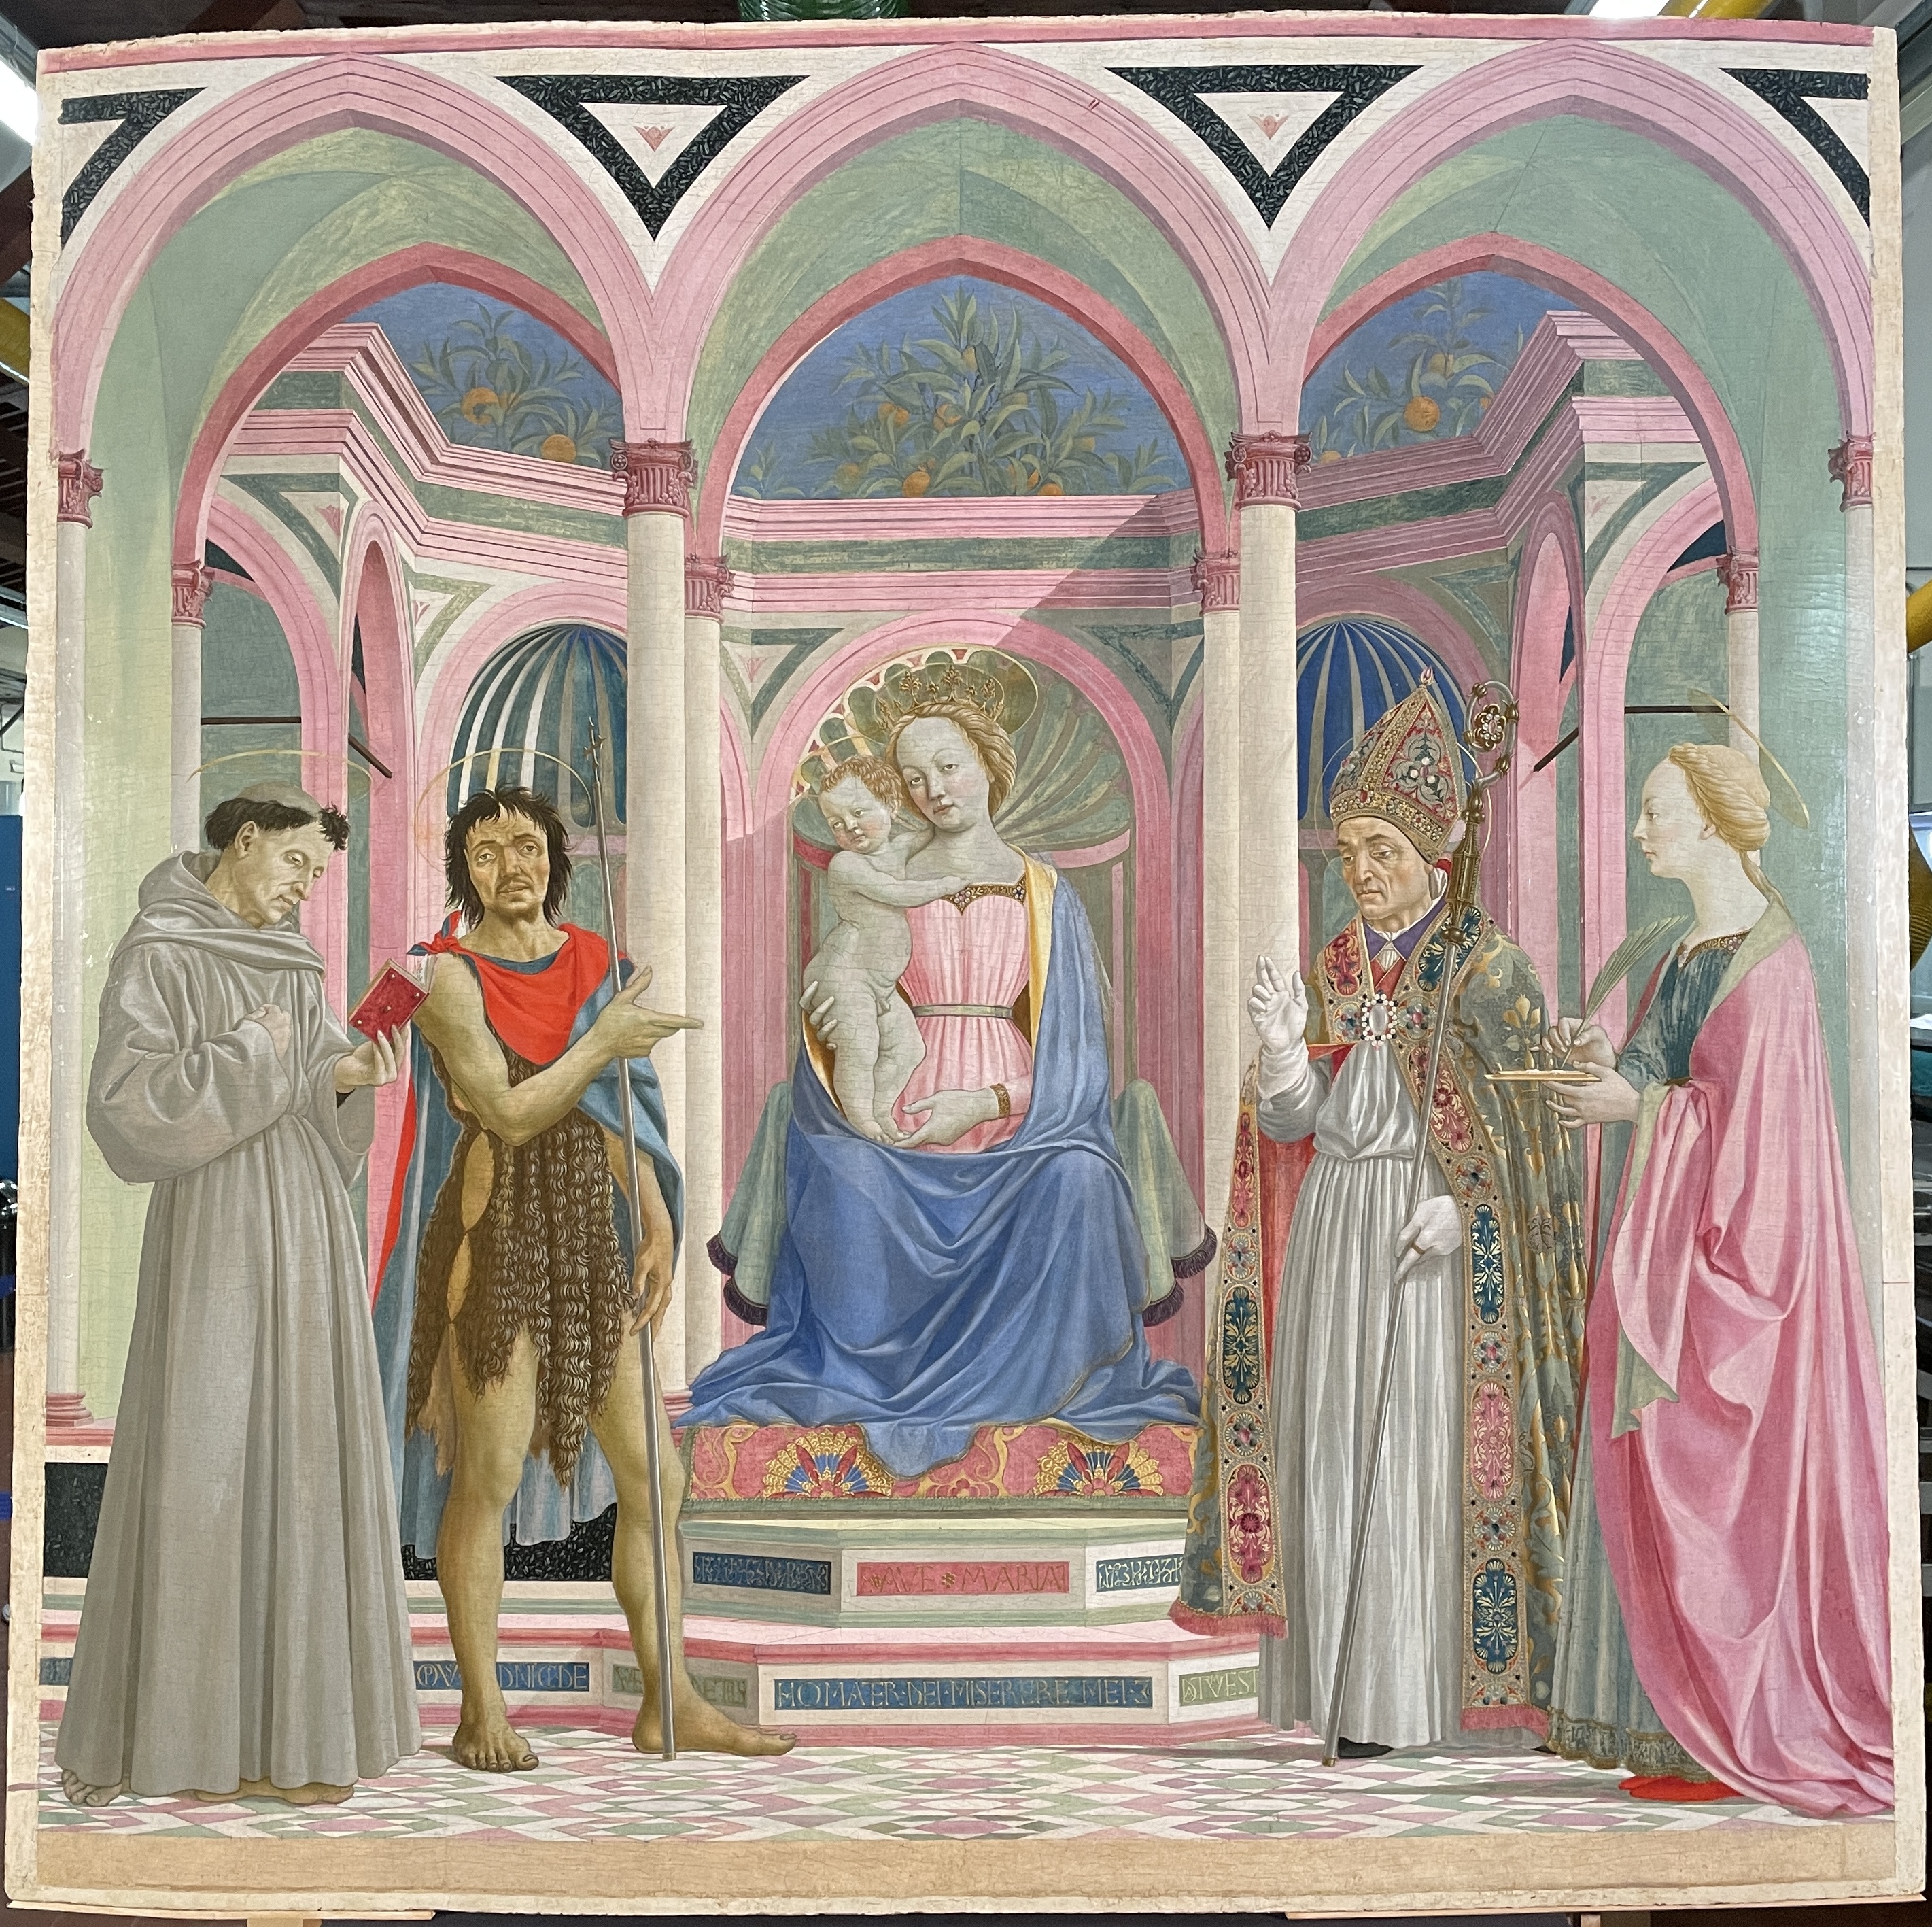 Madonna and Child enthroned with St. Francis, John the Baptist, St. Zenobius and St. Lucy